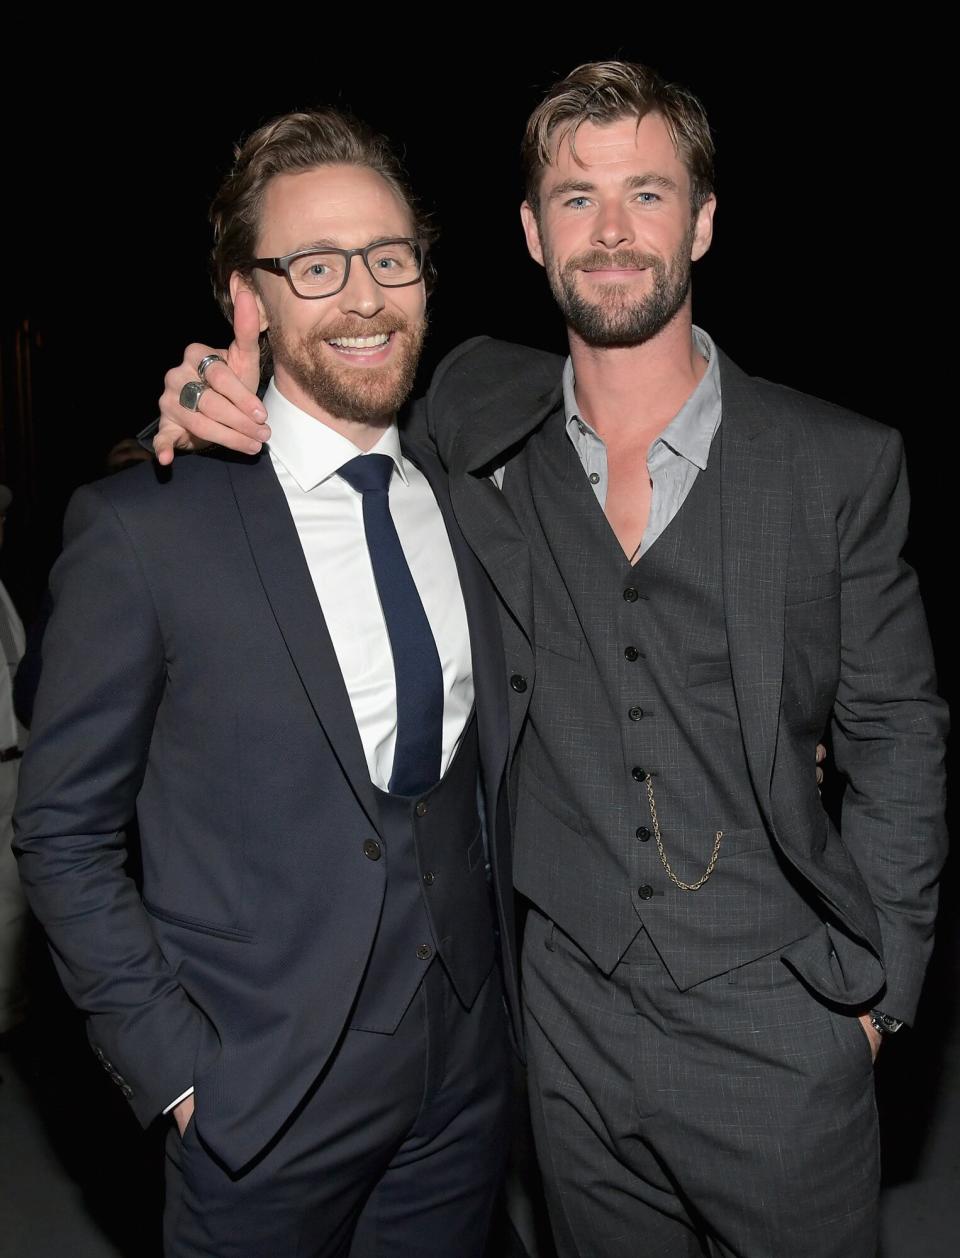 Actors Tom Hiddleston (L) and Chris Hemsworth attend the Los Angeles Global Premiere for Marvel Studios’ Avengers: Infinity War on April 23, 2018 in Hollywood, California.